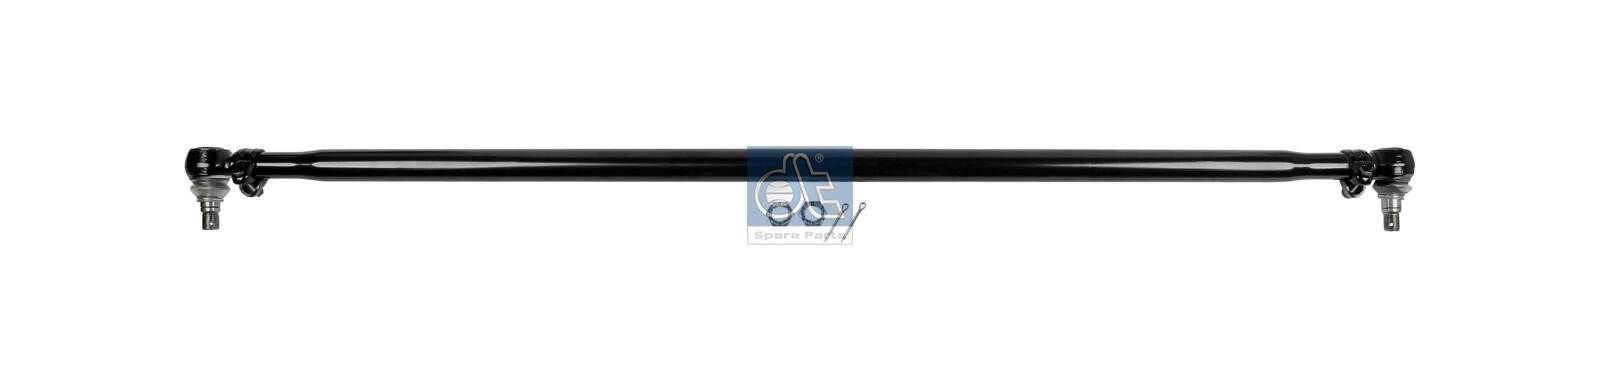 DT Spare Parts 6.53009 Rod Assembly 5010 566 059